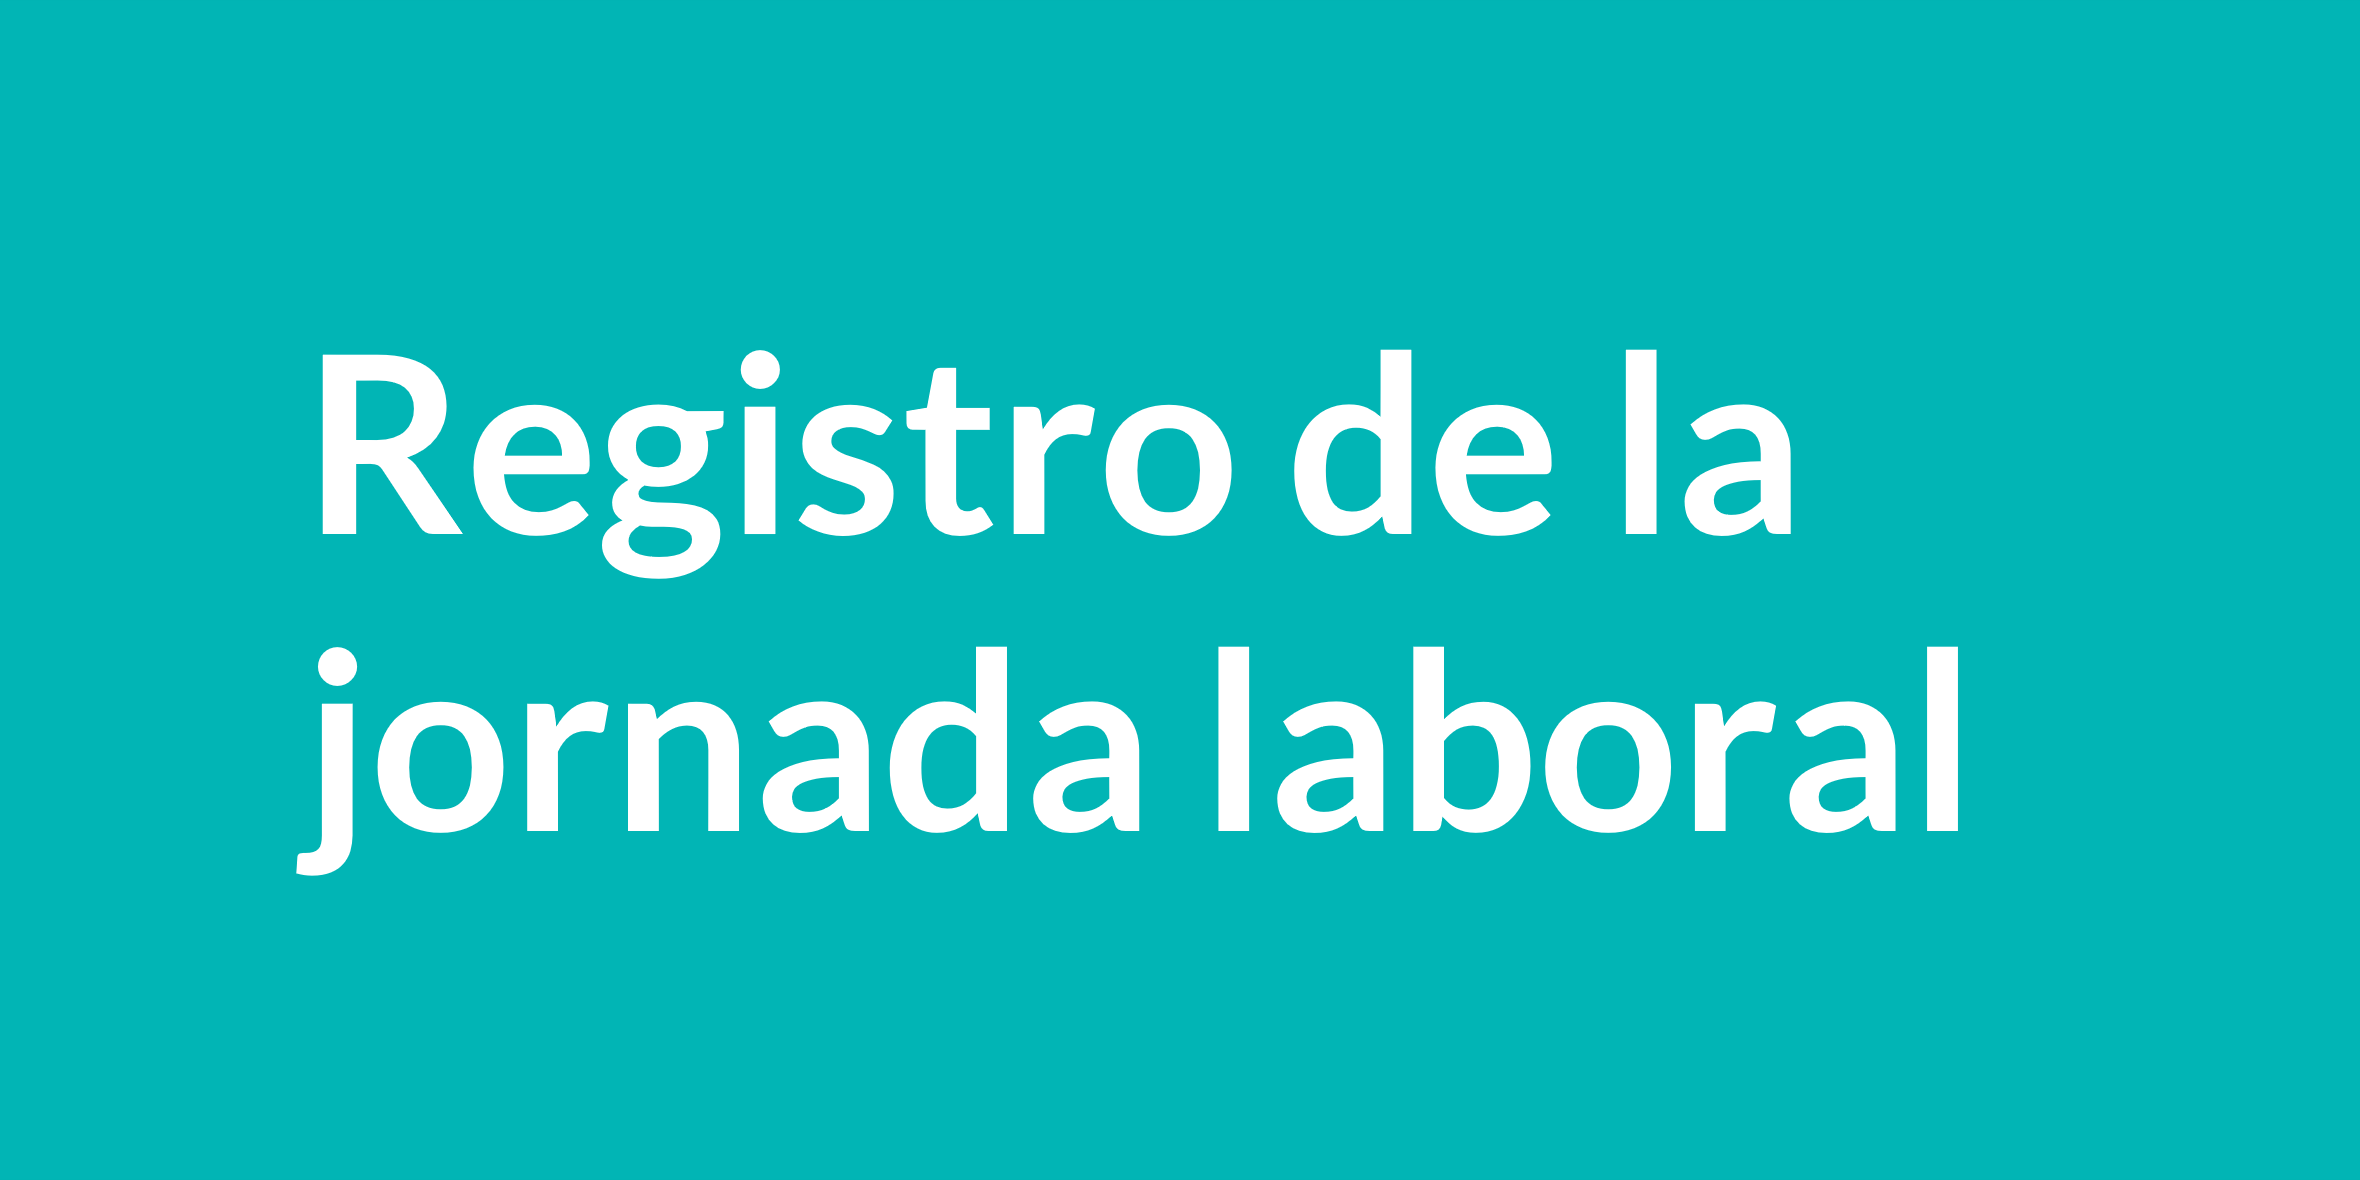 Registration of working hours